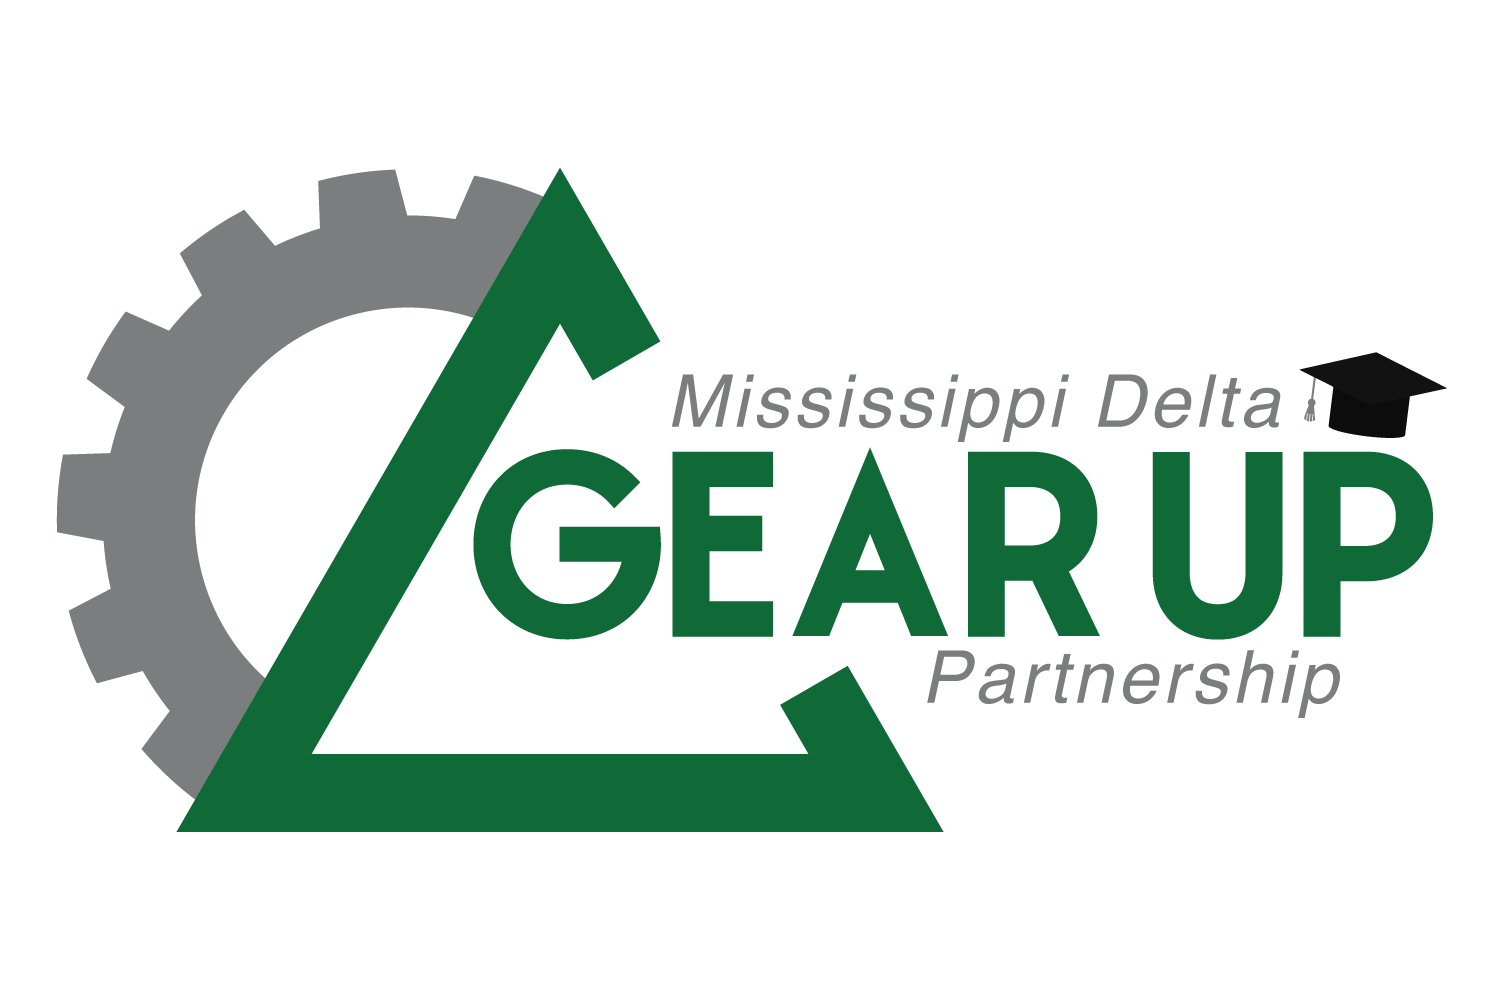 Mississippi Delta GEAR UP Partnership - Center for Community and